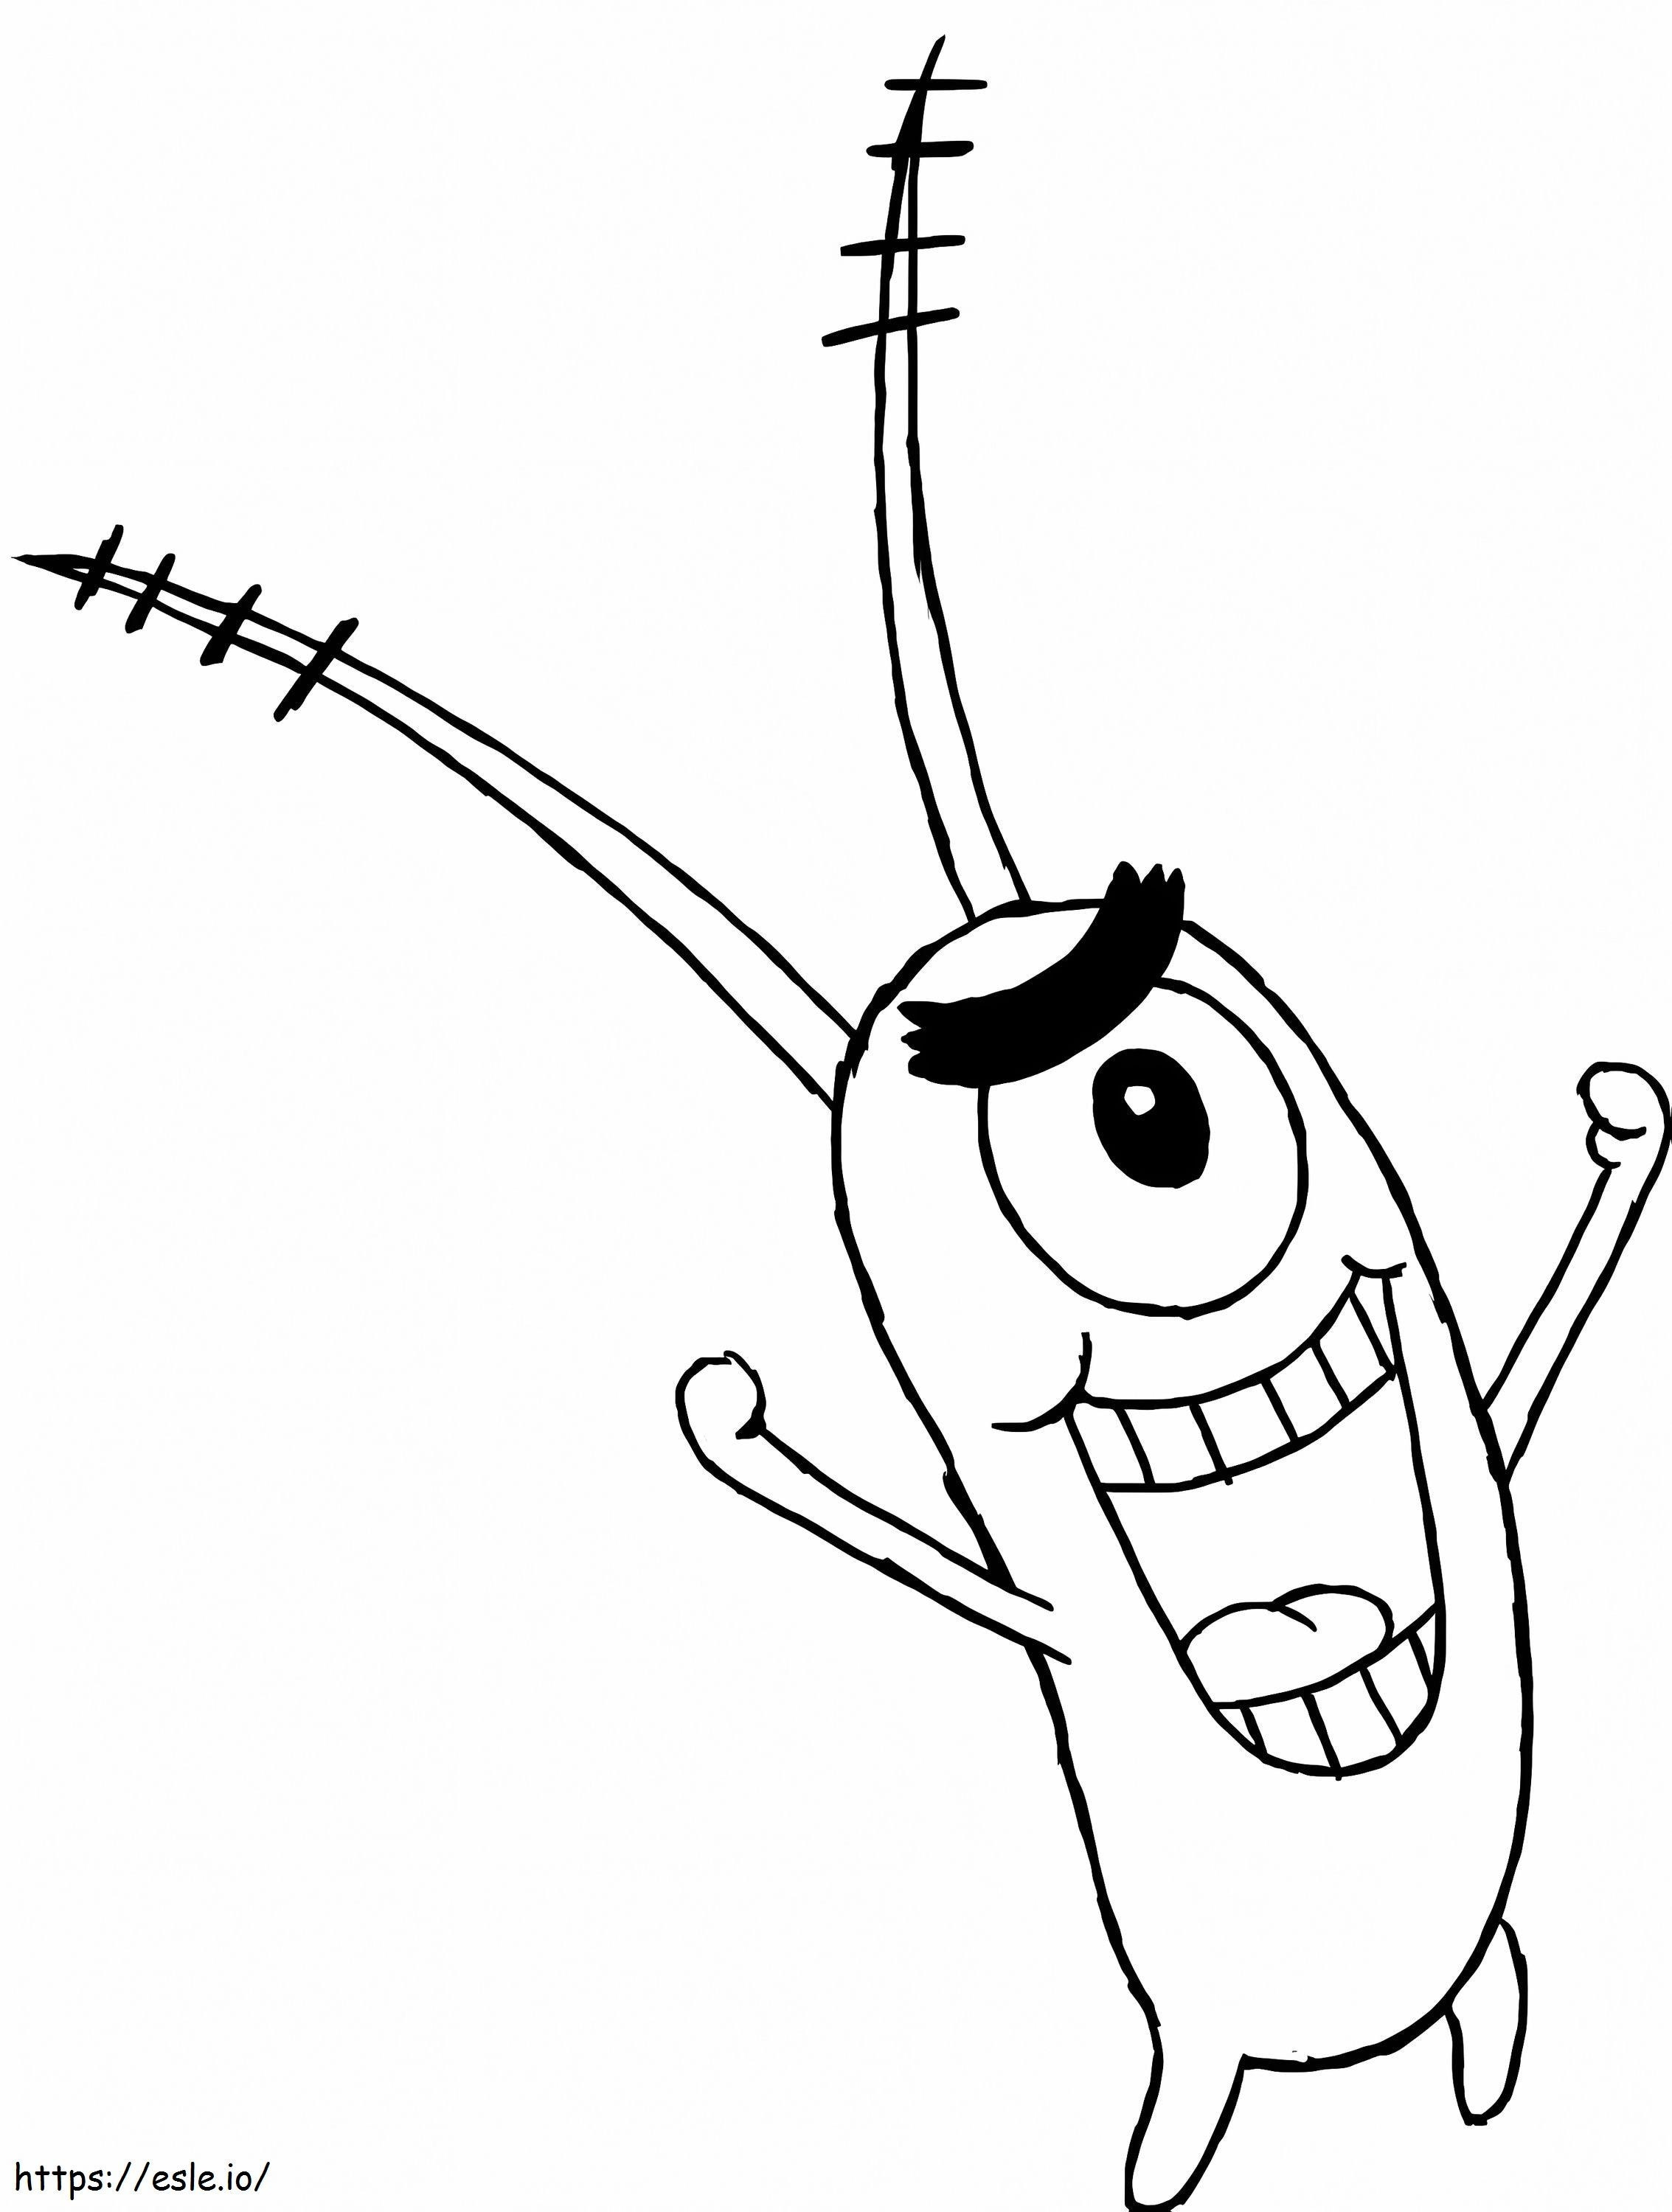 Plankton Is Smiling coloring page